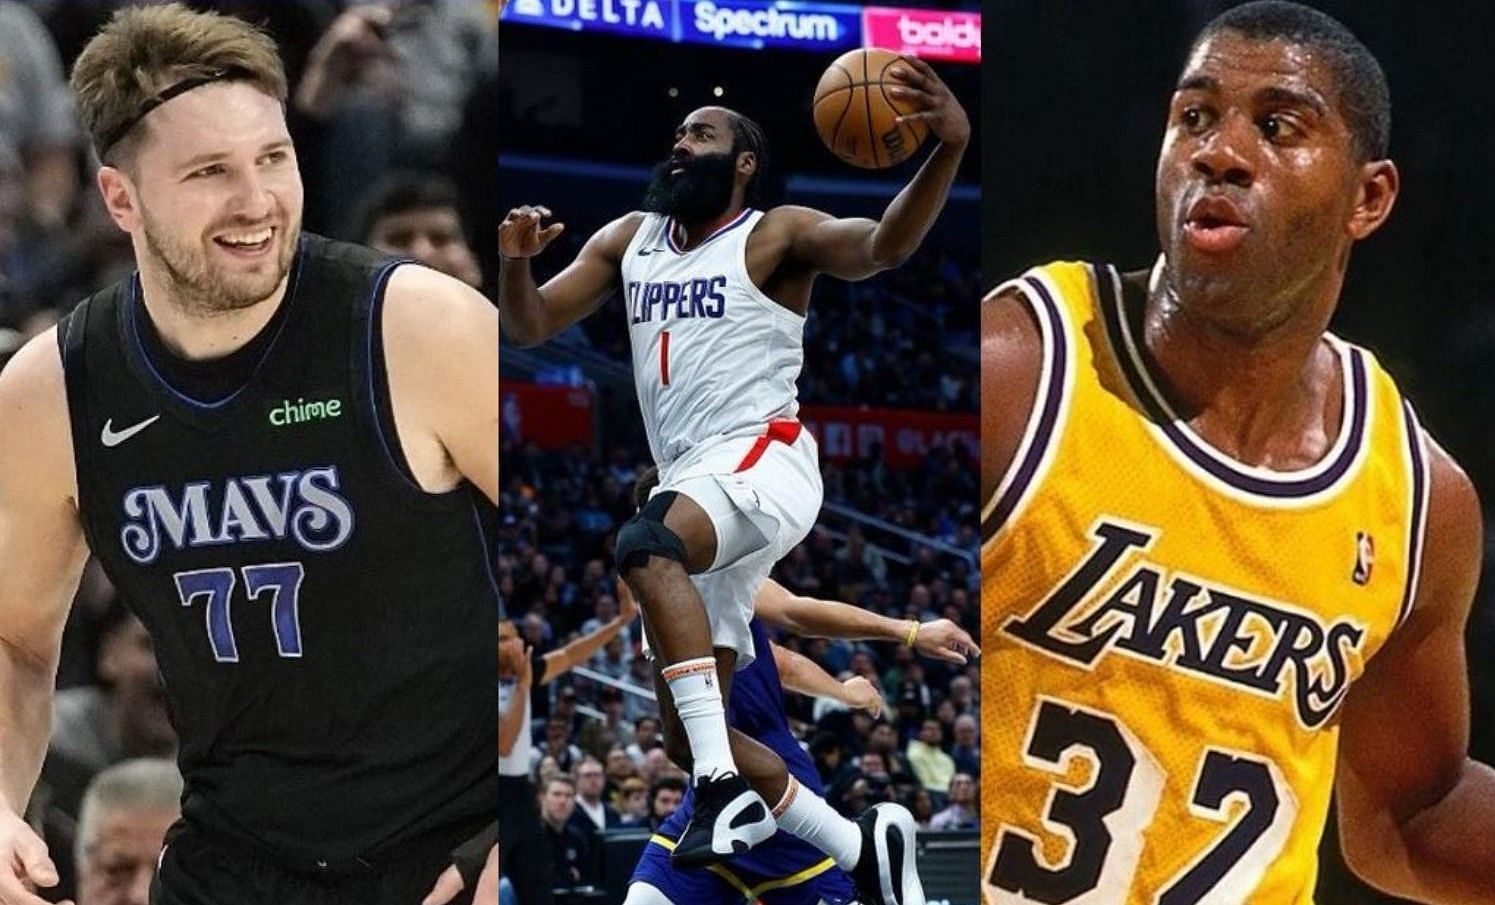 (From left) Luka Doncic, James Harden and Magic Johnson are among the NBA players in the top 5 for career games with at least 25 points, 15 assists and five rebounds.